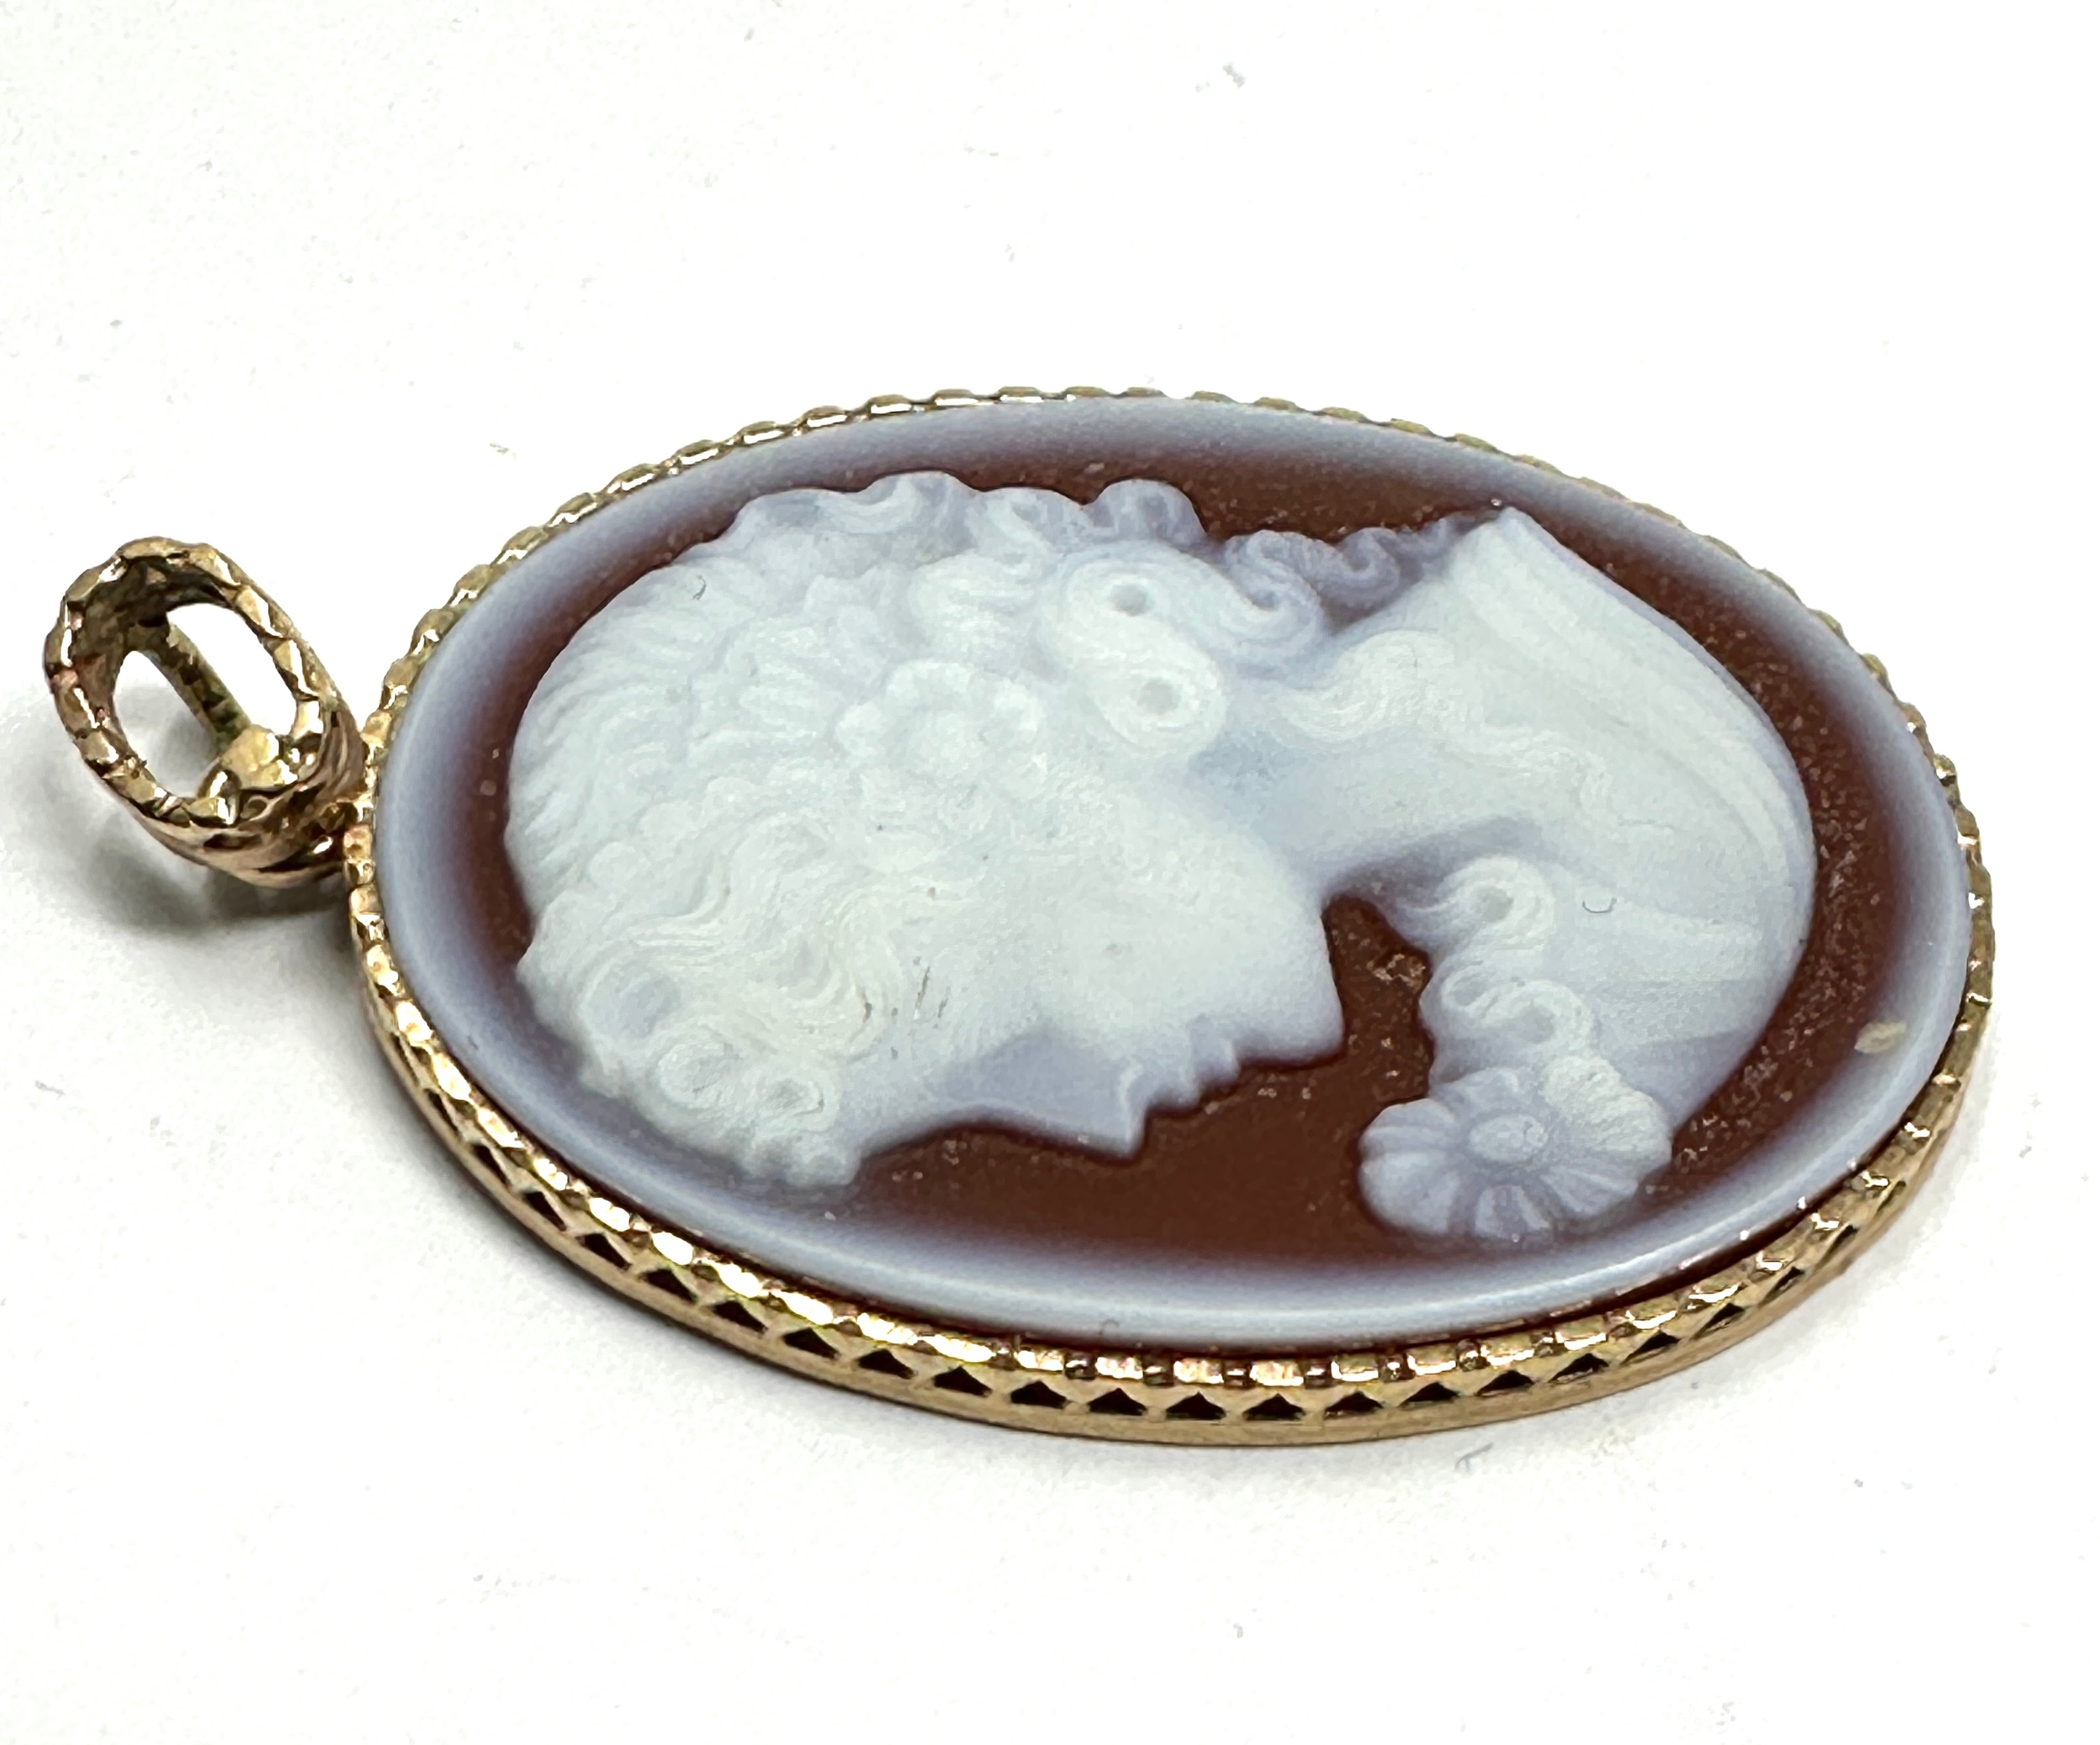 9ct gold framed hard stone cameo pendant measures approx 4cm drop by 2.3cm wide weight 5.5g - Image 2 of 3